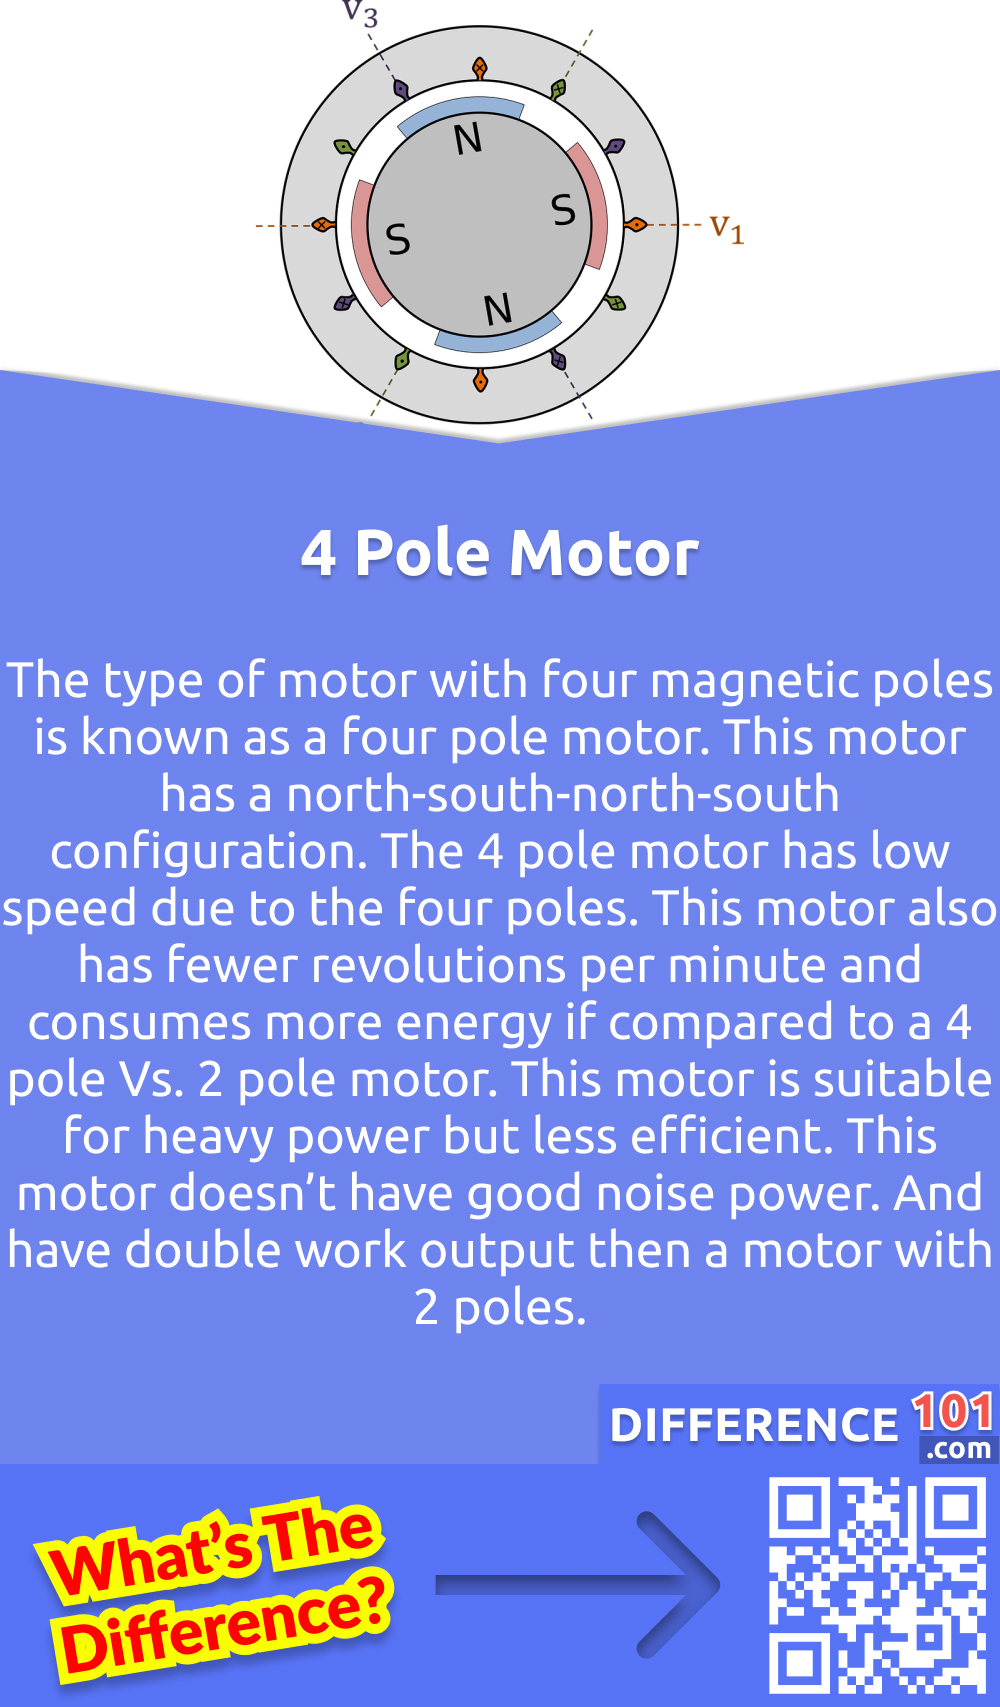 What is a 4 Pole Motor? The type of motor with four magnetic poles is known as a four pole motor. This motor has a north-south-north-south configuration. The 4 pole motor has low speed due to the four poles. This motor also has fewer revolutions per minute and consumes more energy if compared to a 4 pole Vs. 2 pole motor. This motor is suitable for heavy power but less efficient. This motor doesn’t have good noise power. And have double work output then a motor with 2 poles.